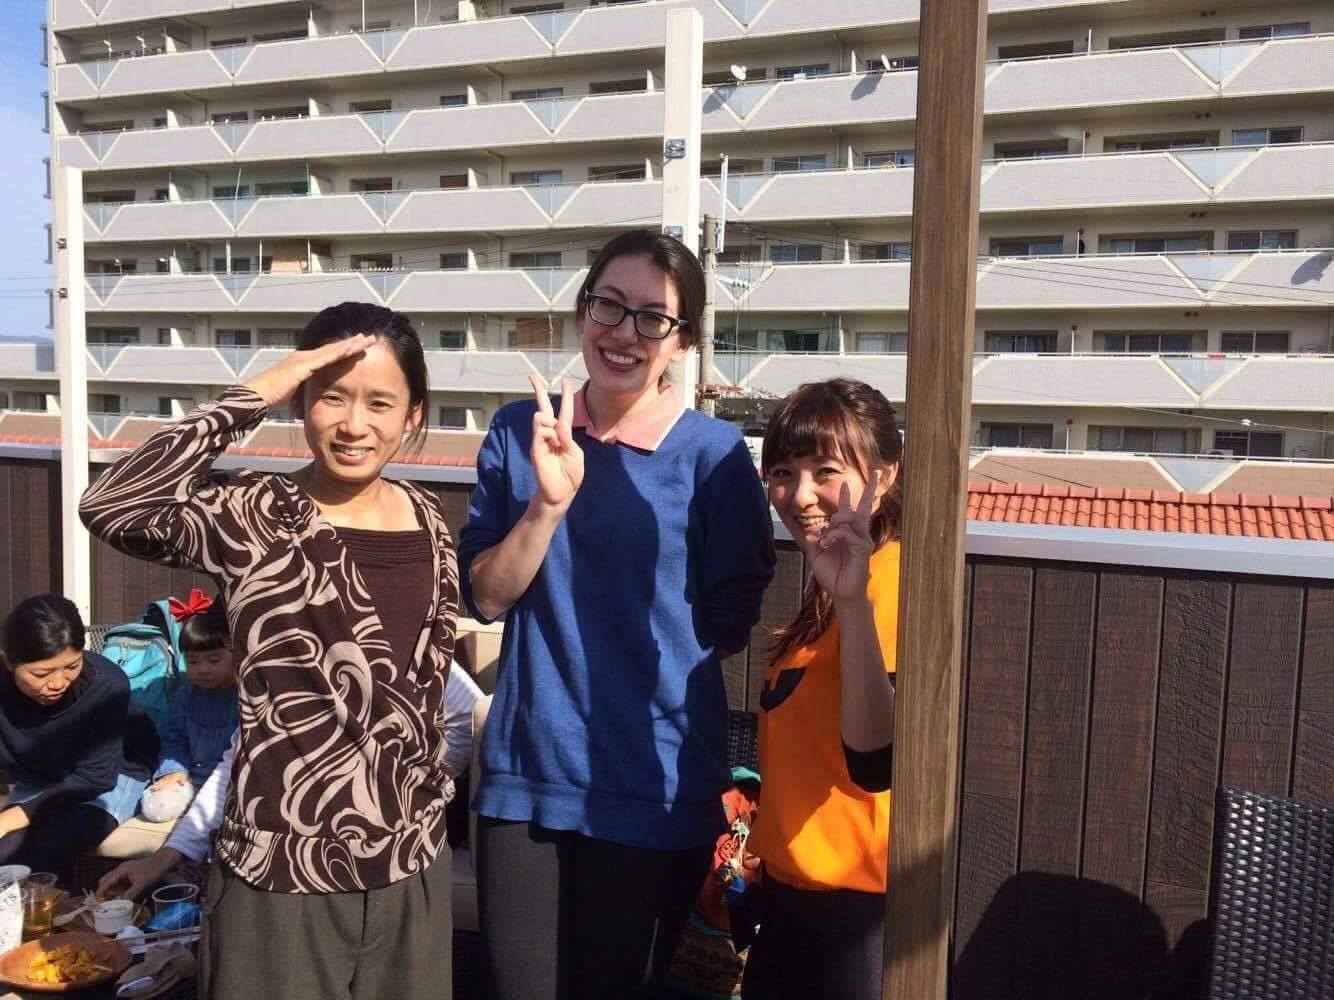 My new friend Akiko (to the left)! We actually met because my mother-in-law struck up a conversation with her on the train while she was visiting us. :-) We've been good friends ever since.